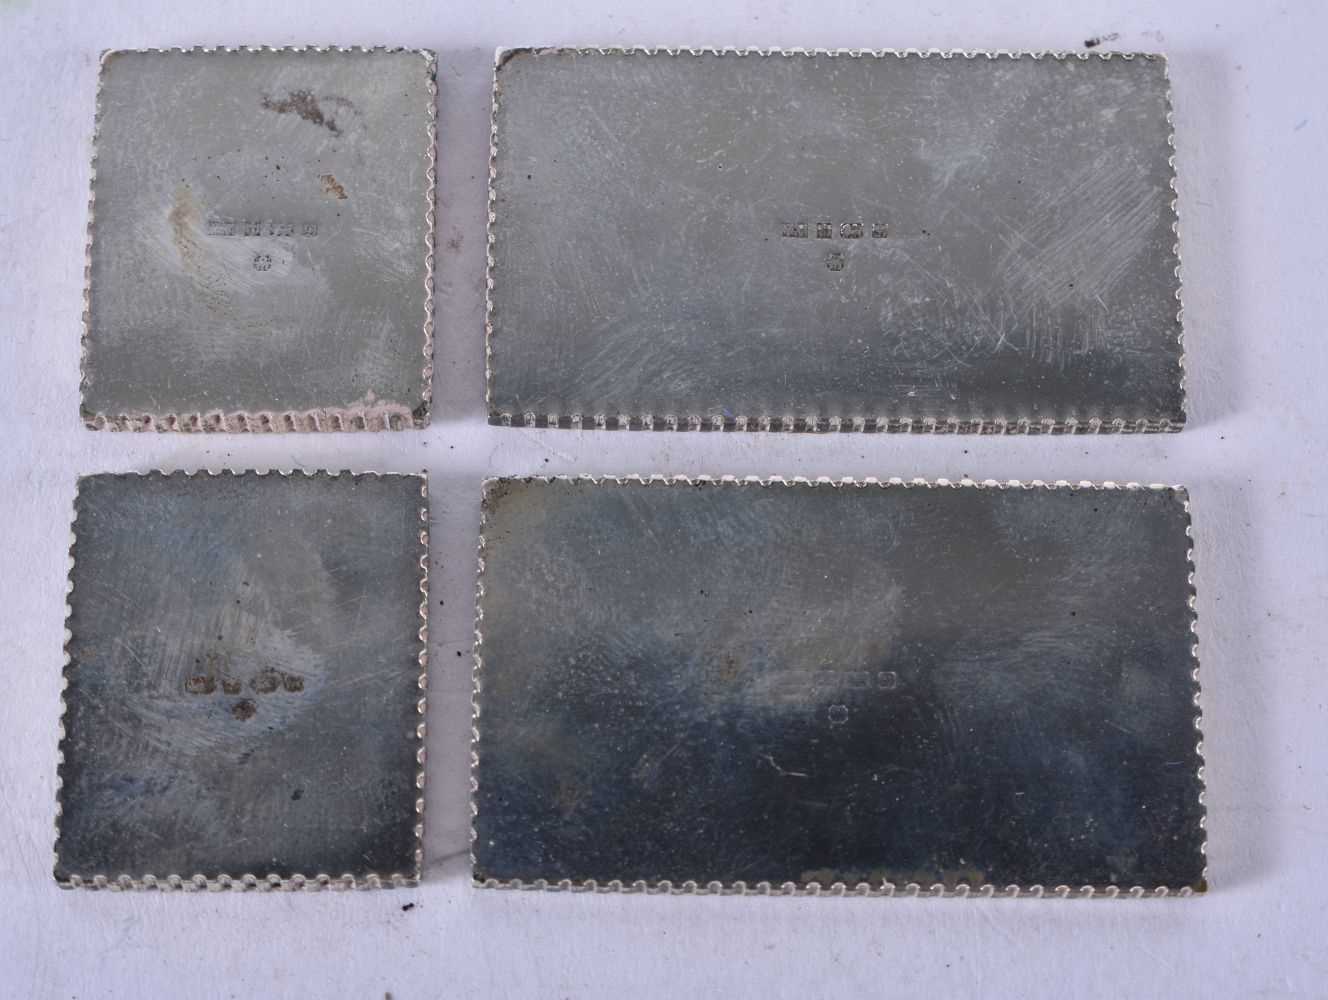 Boxed silver commemorative Postage Revenue ingots. Hallmarked Birmingham 1978, Weight of Silver 52. - Image 4 of 5